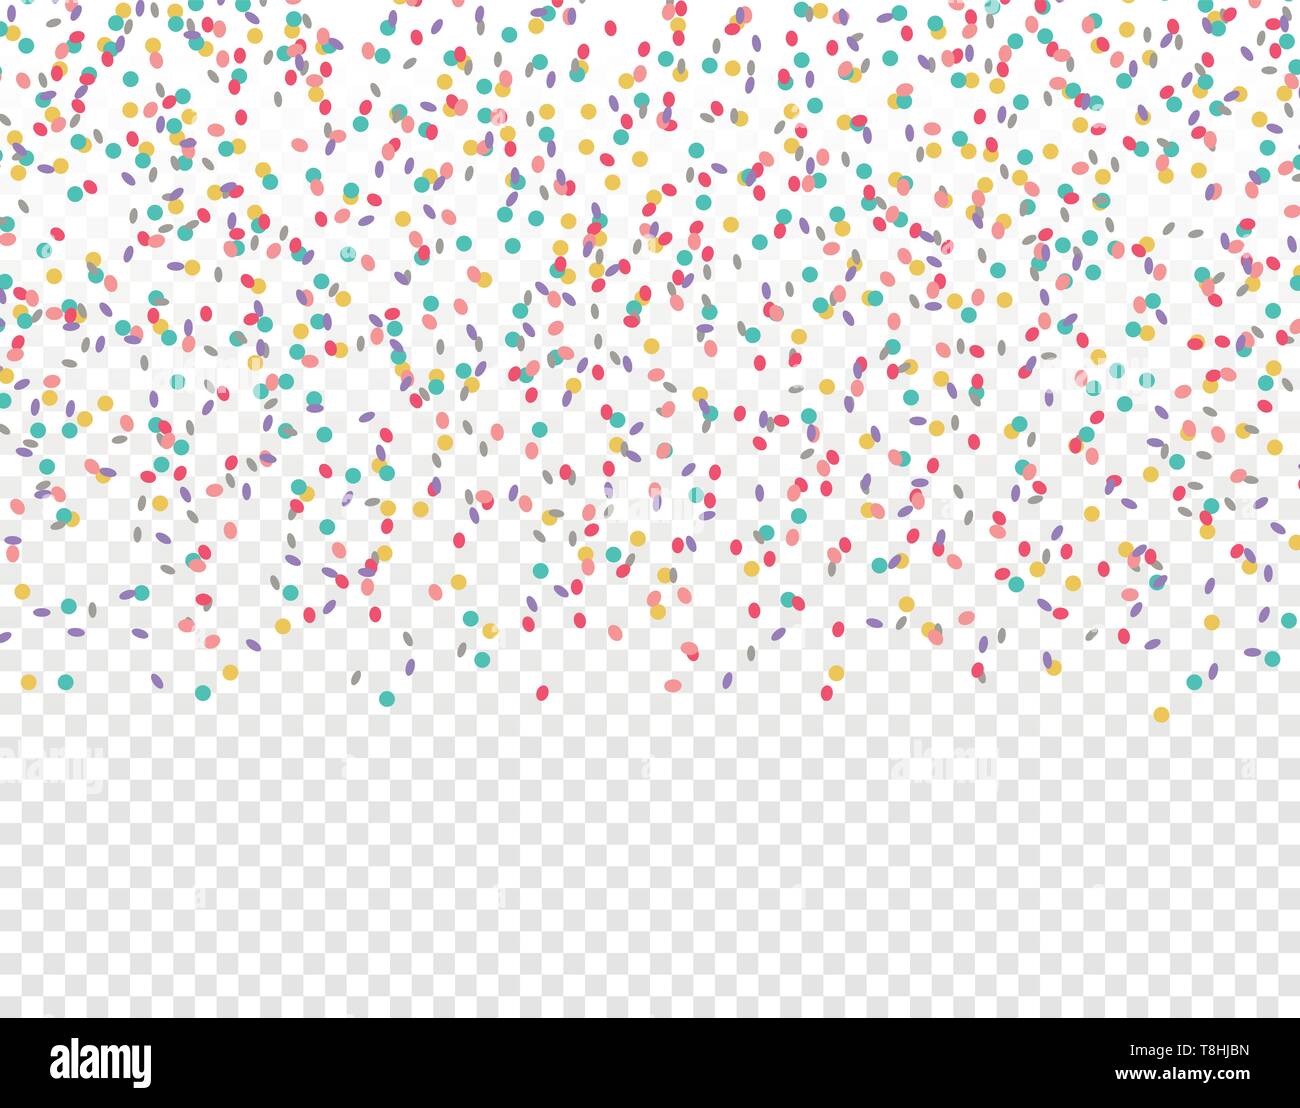 Falling colorful confetti background isolated Stock Vector